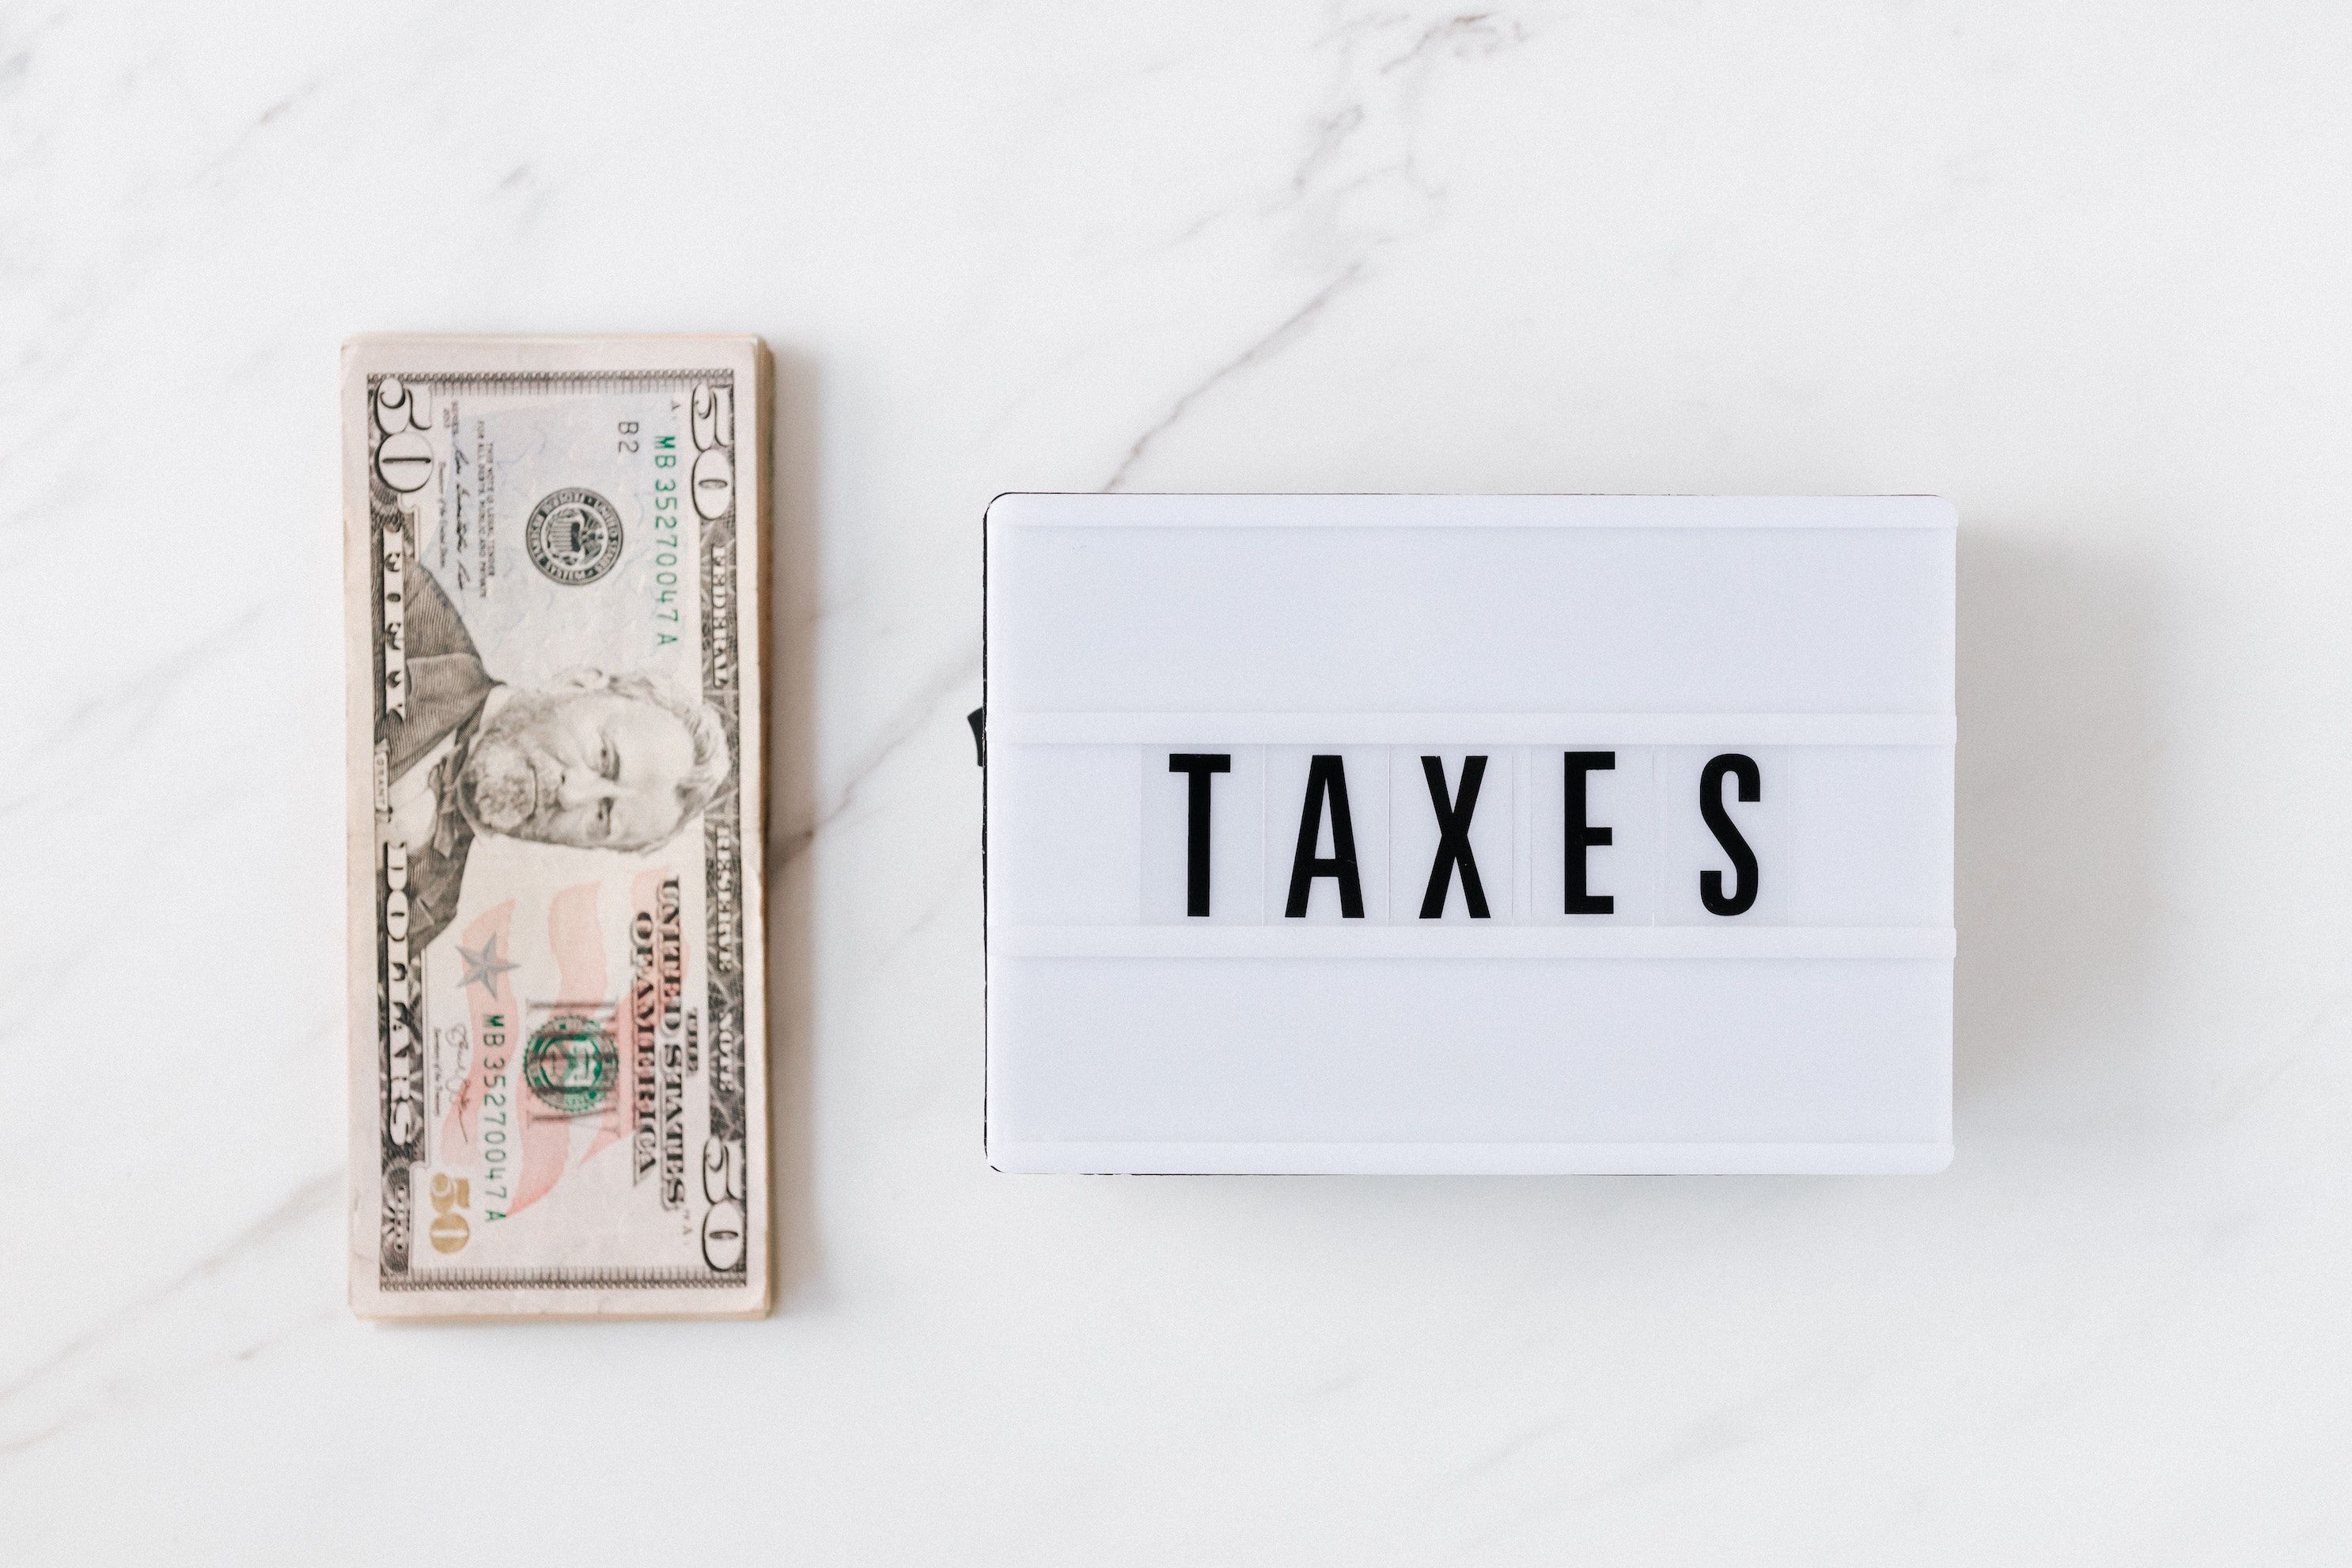 Flat lay of stack of bills and sign that says "TAXES," on a white marble surface